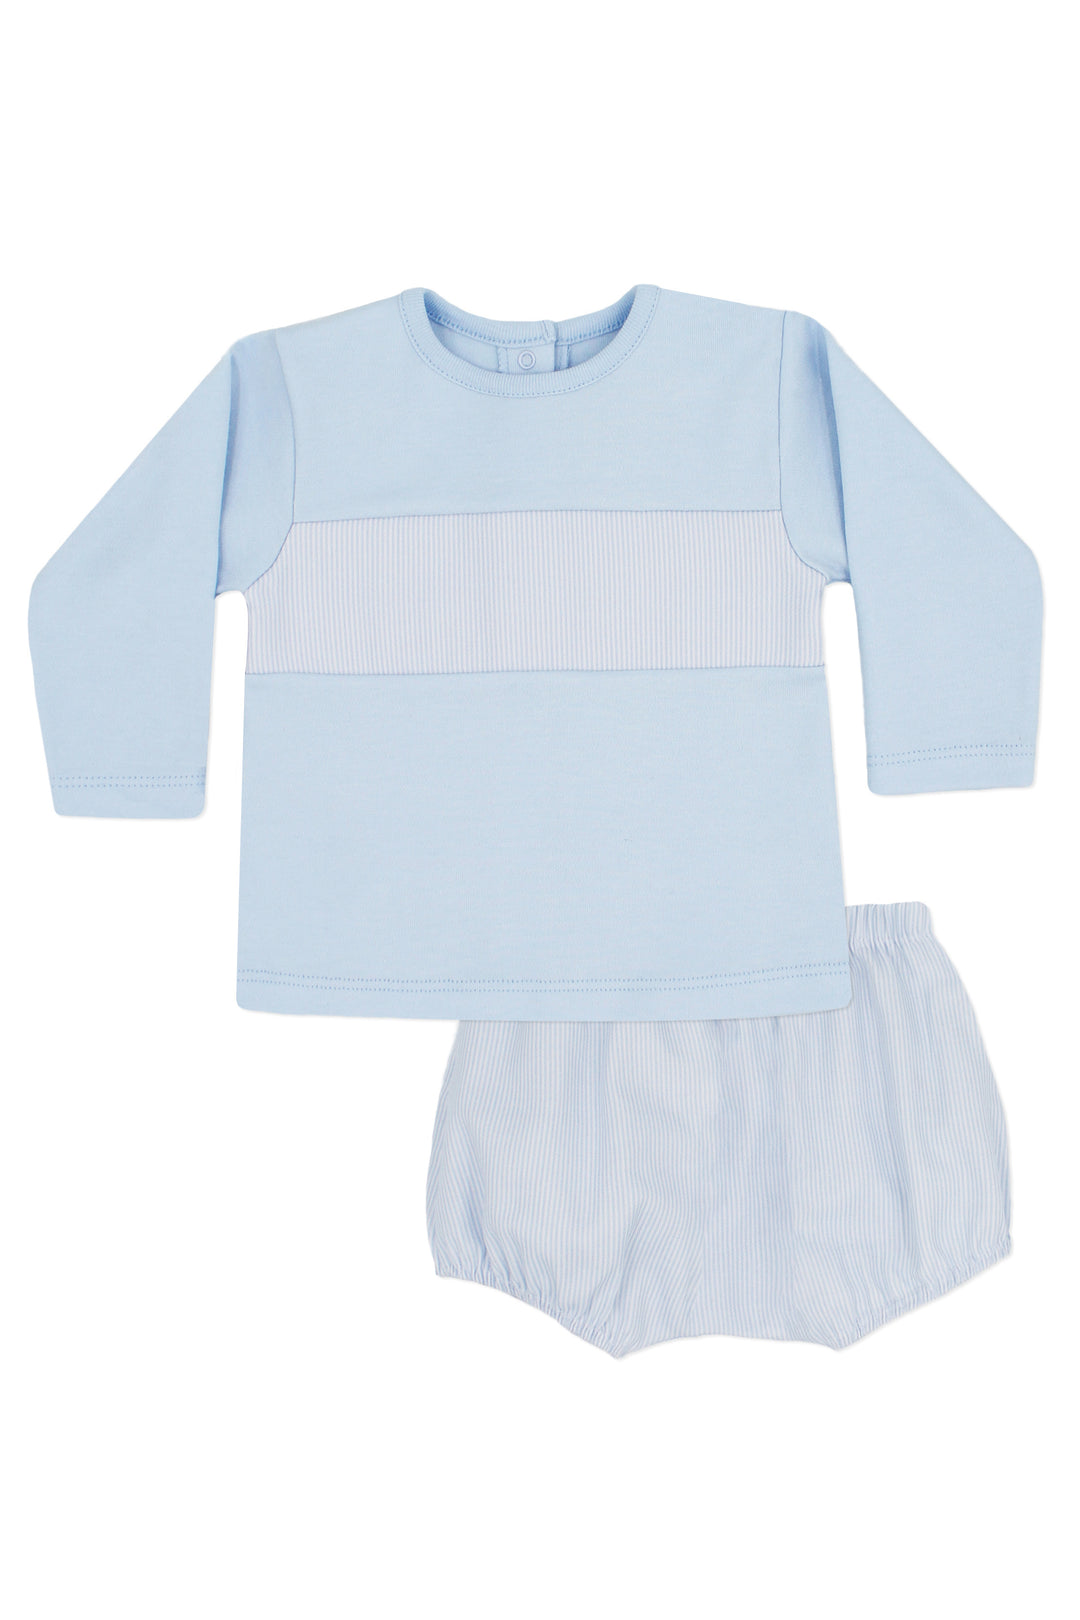 Rapife "Theodore" Blue Top & Striped Jam Pants | Millie and John